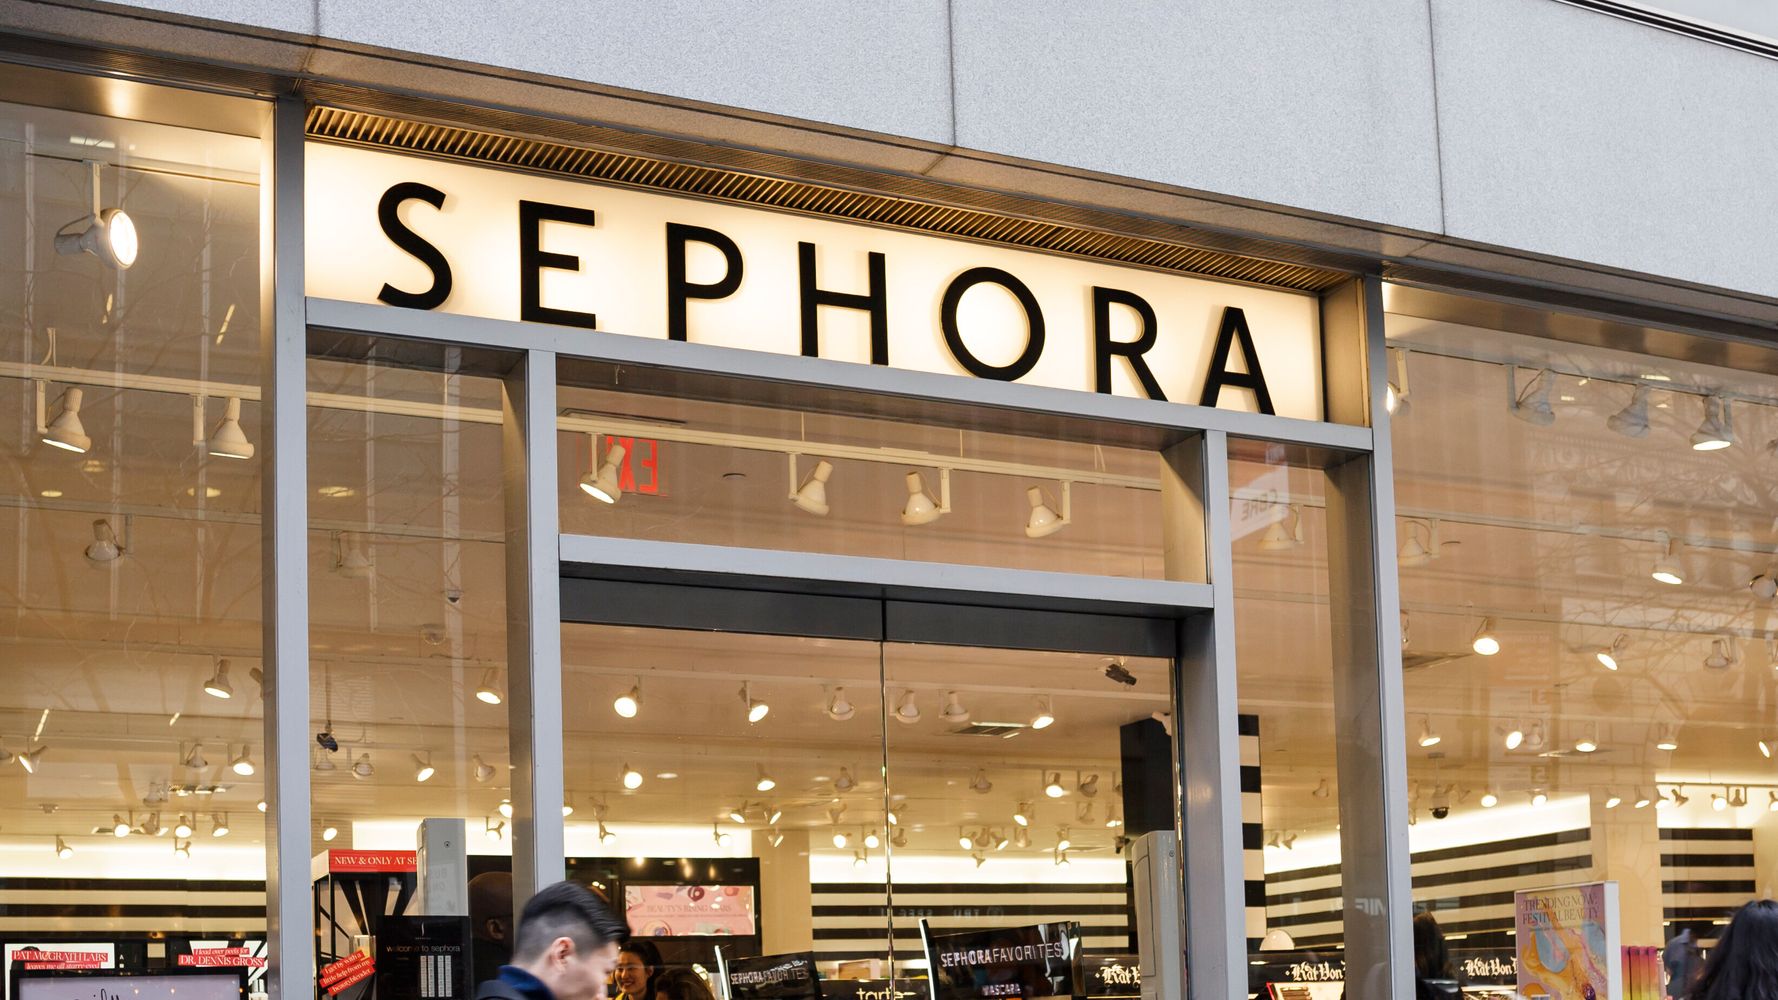 Sephora is Having A Cyber Monday Sale And Here's What You Can Buy